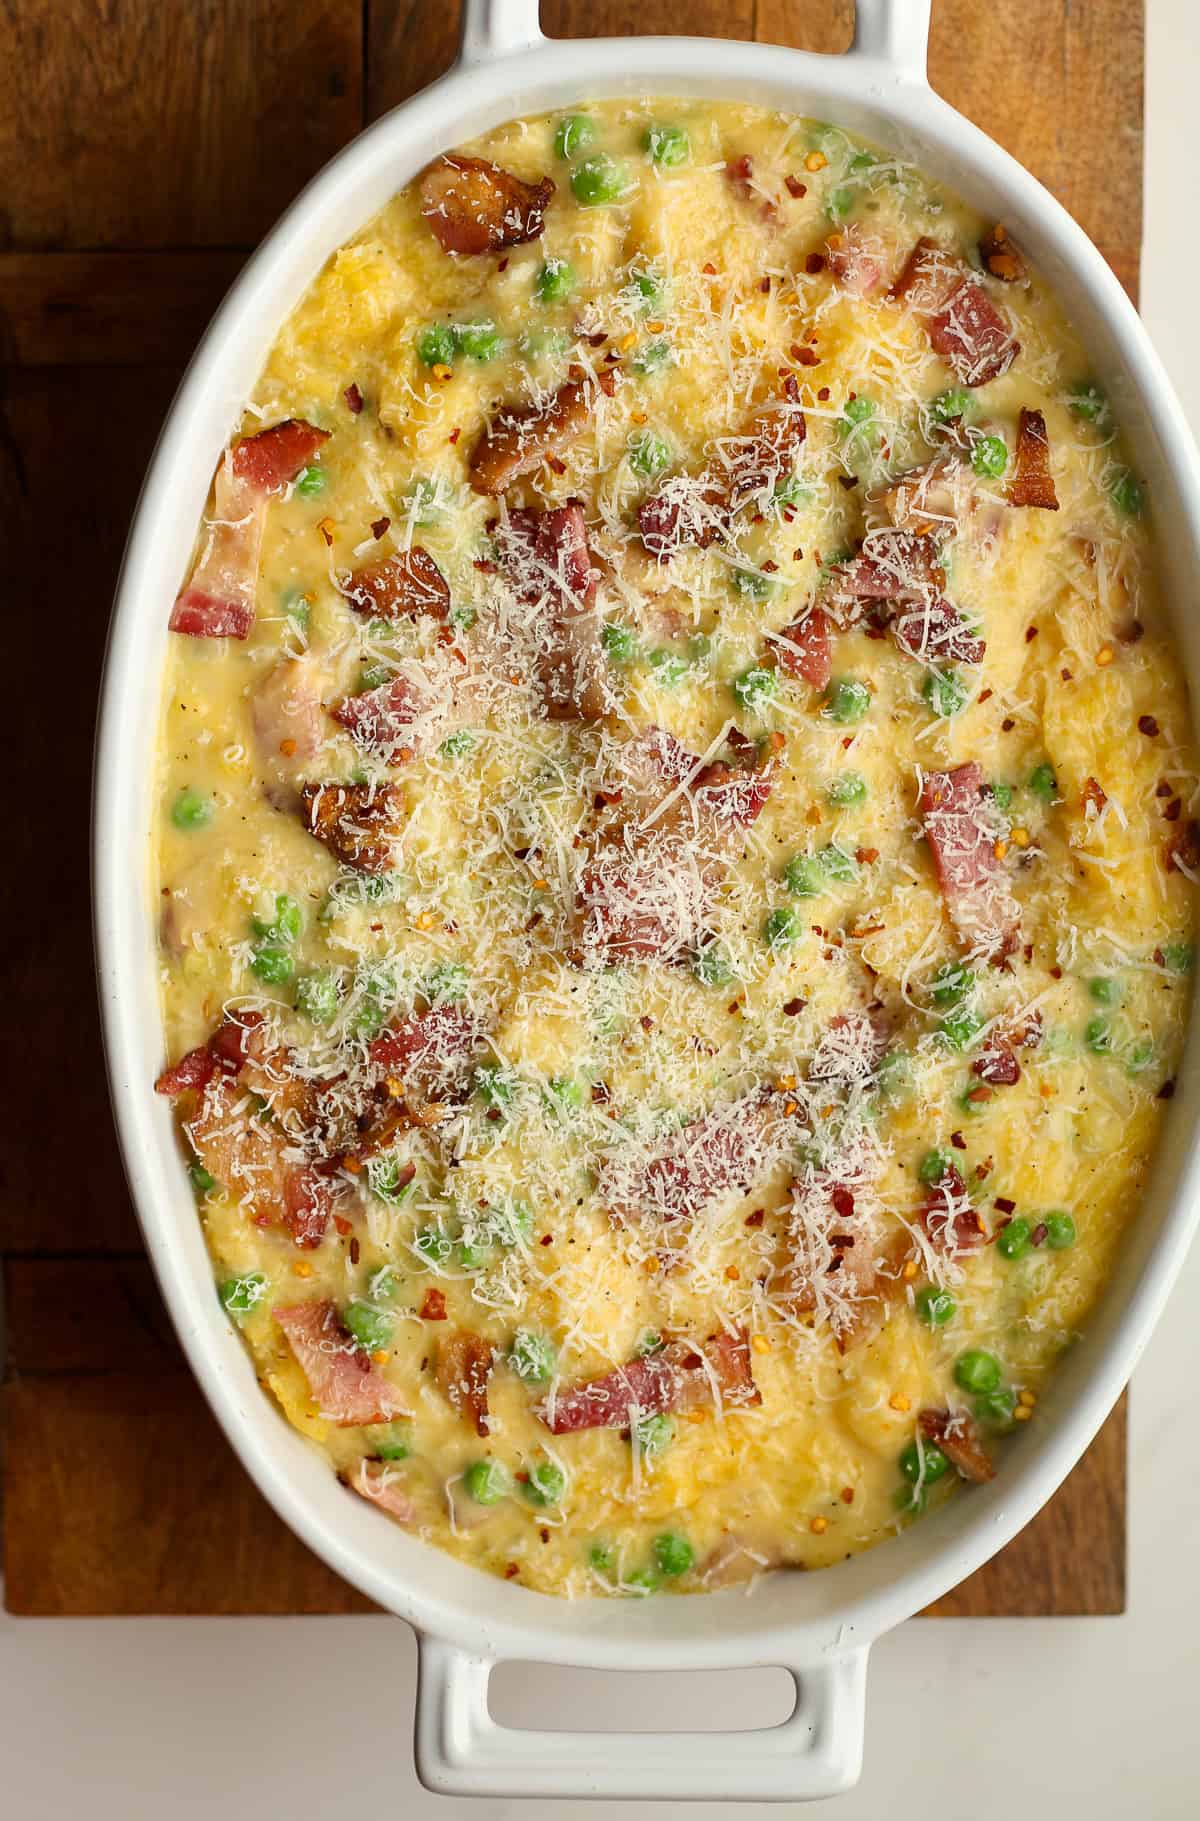 A dish of the unbaked casserole.